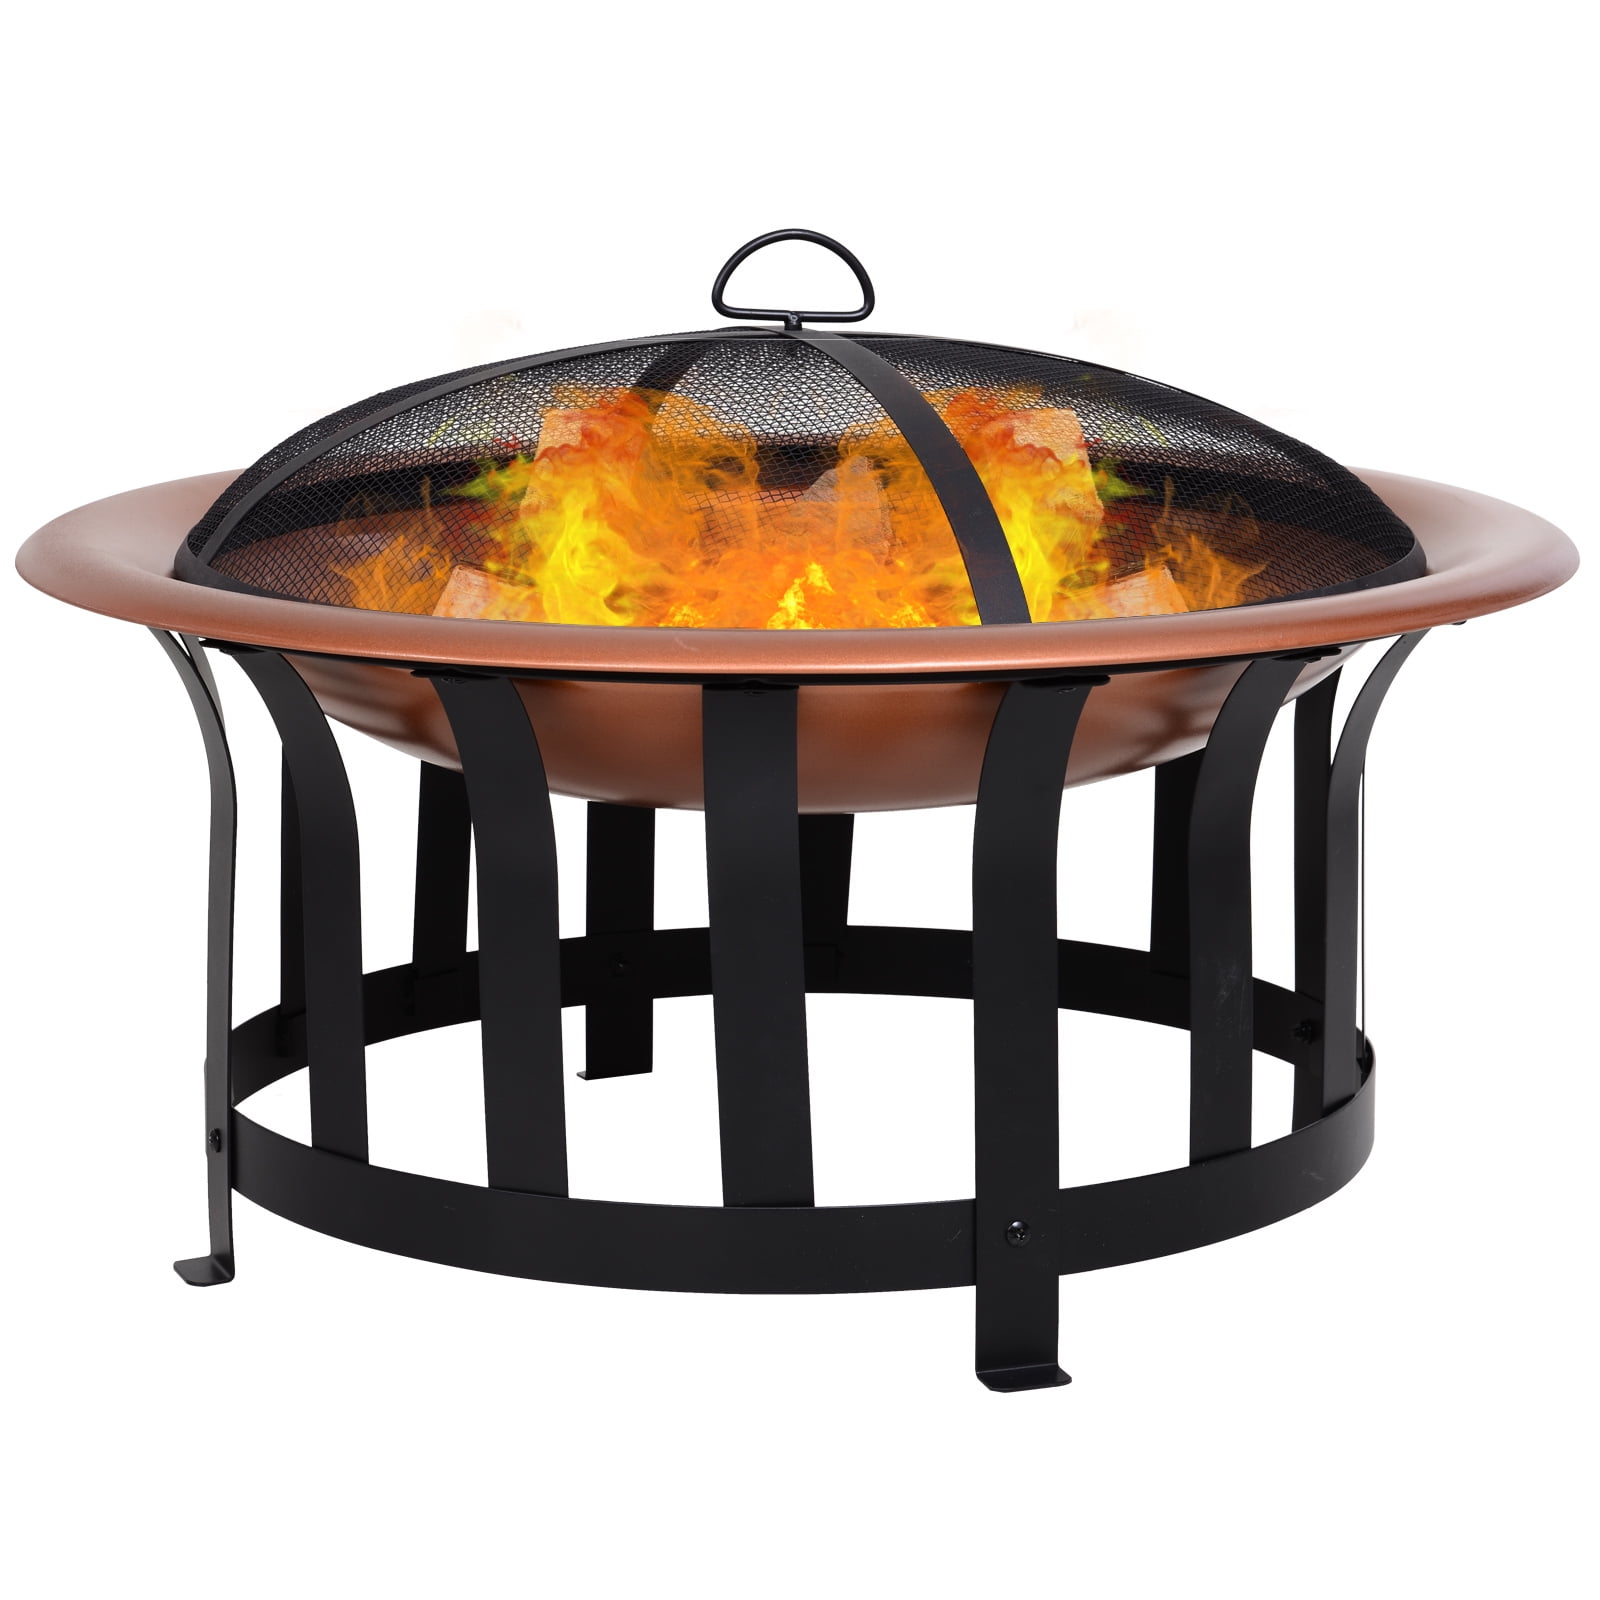 Outsunny Copper-Colored Round Metal Wood Fire Pit Bowl with Black Ornate  Base, Poker, & Mesh Screen for Ember Protection - Walmart.com